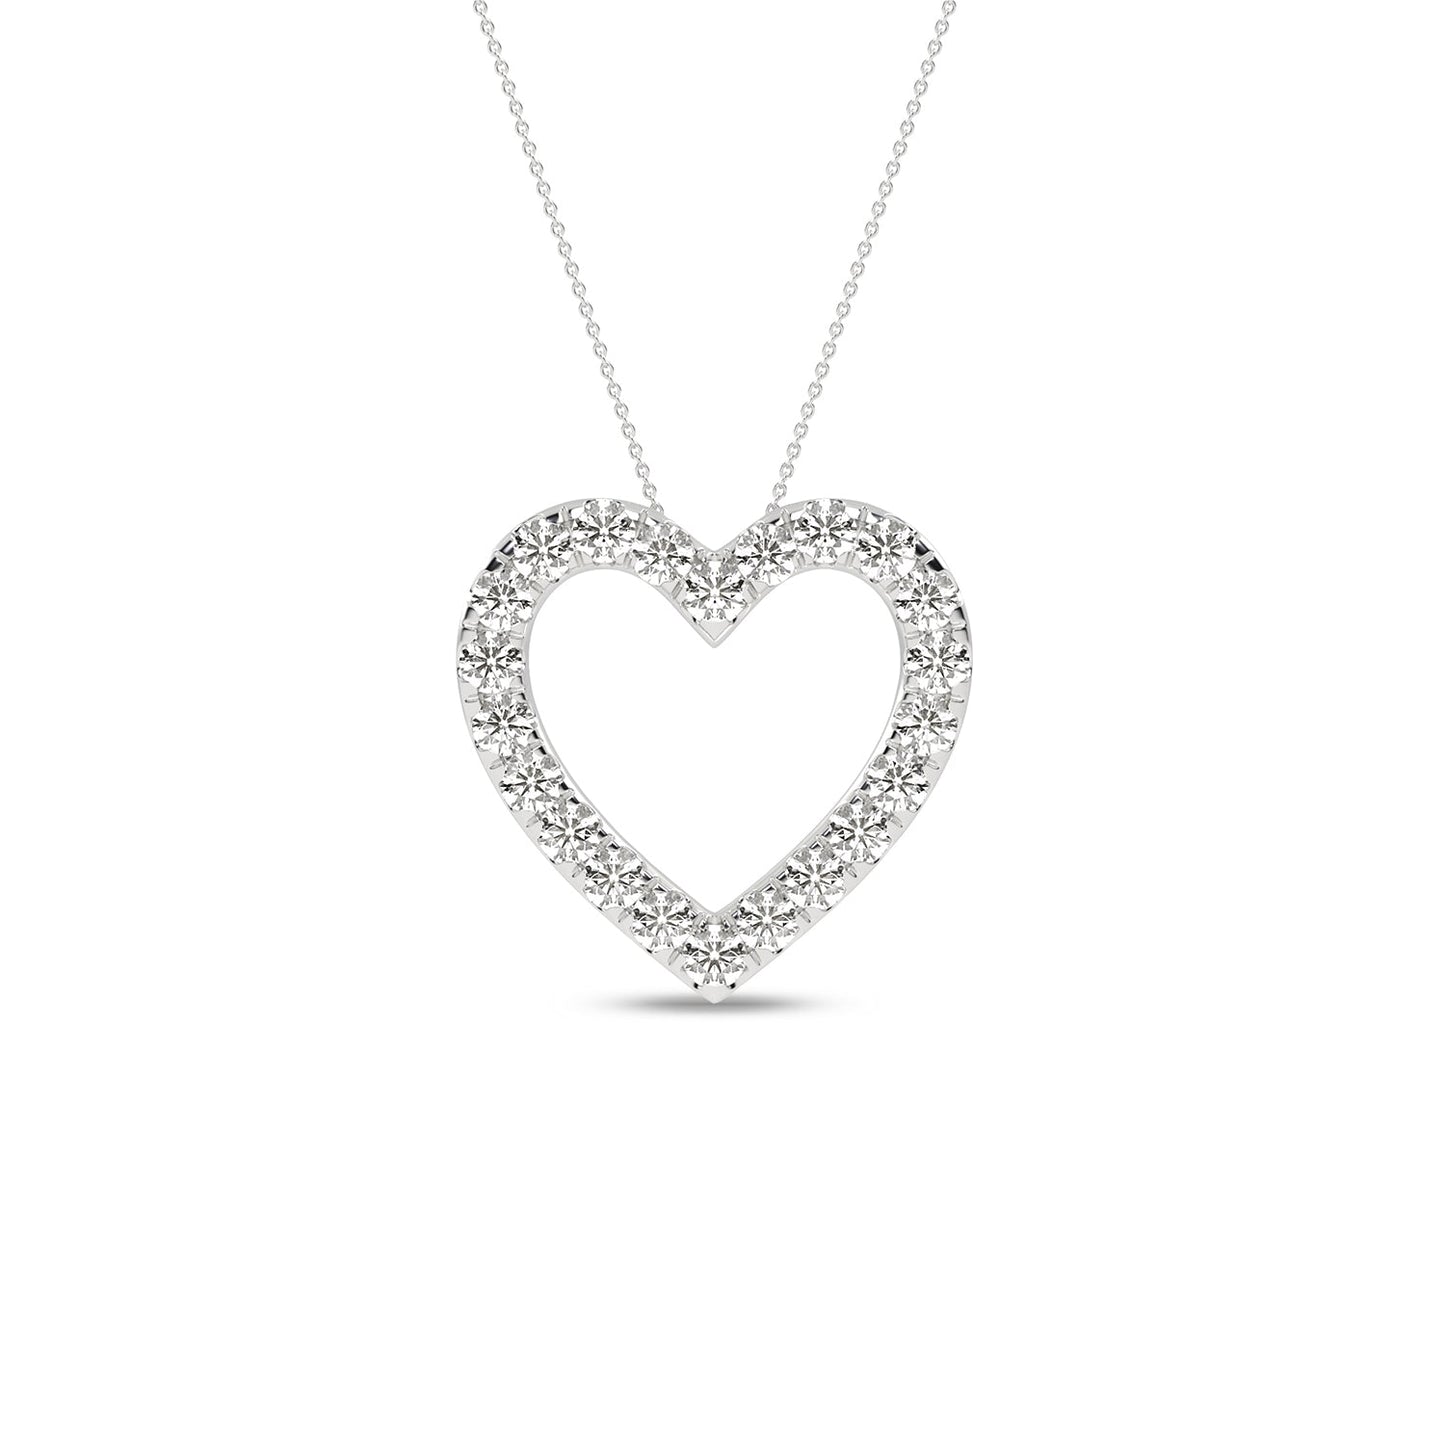 Atmos Heart Silhouette Necklace_Product Angle_1/2 Ct. - 1